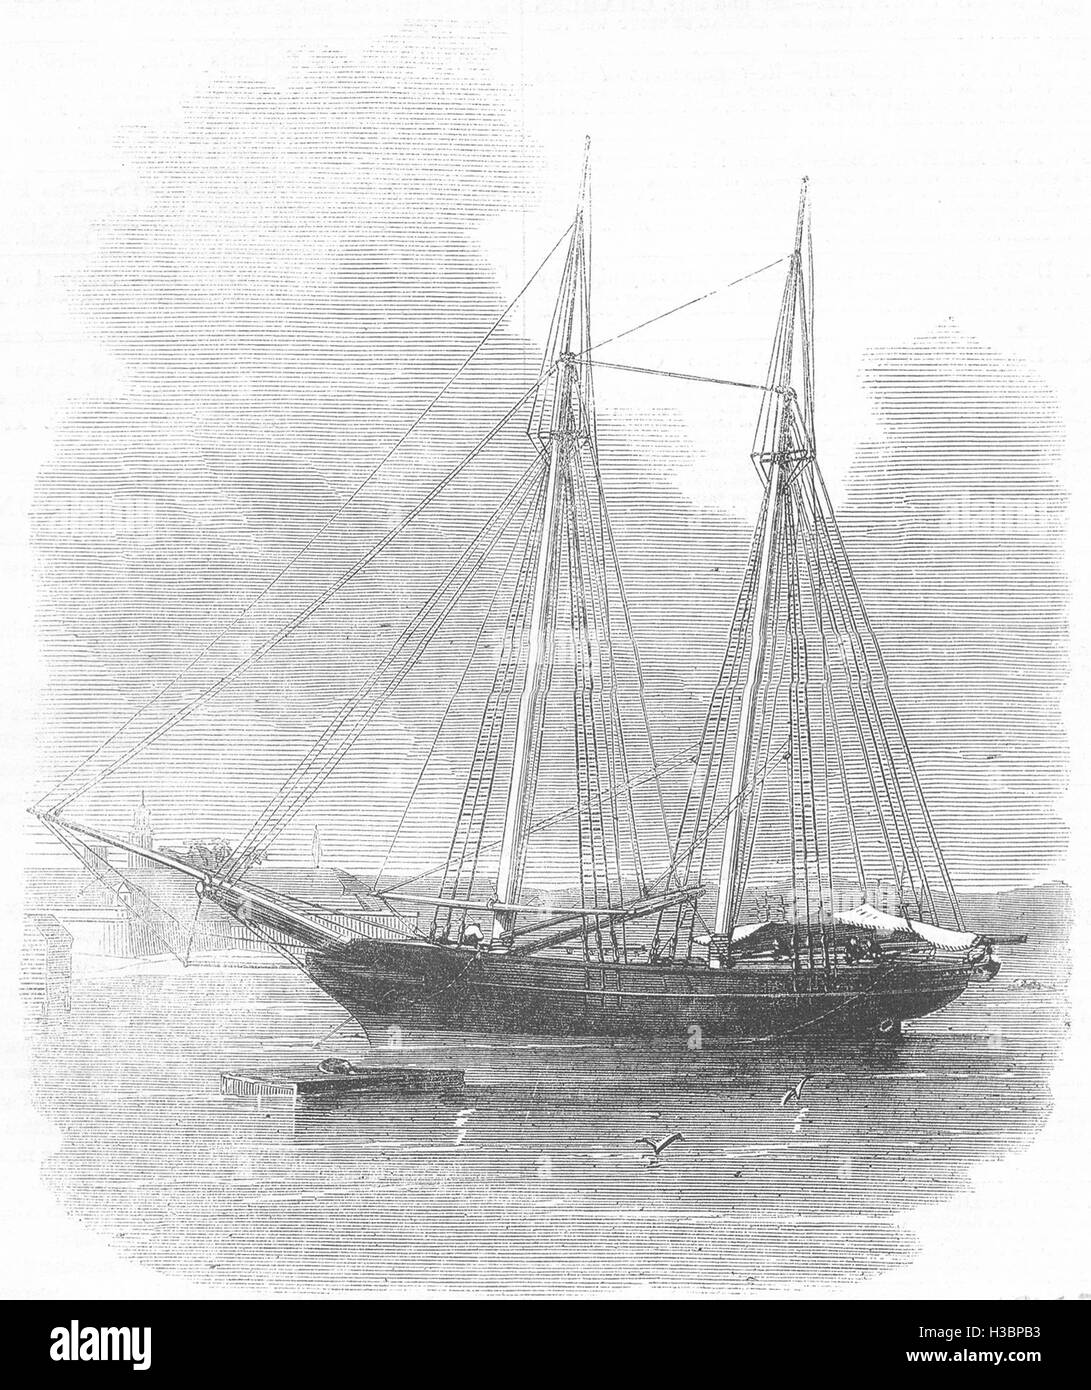 JAMAICA The Slave-schooner at Port Royal 1857. The Illustrated London News Stock Photo